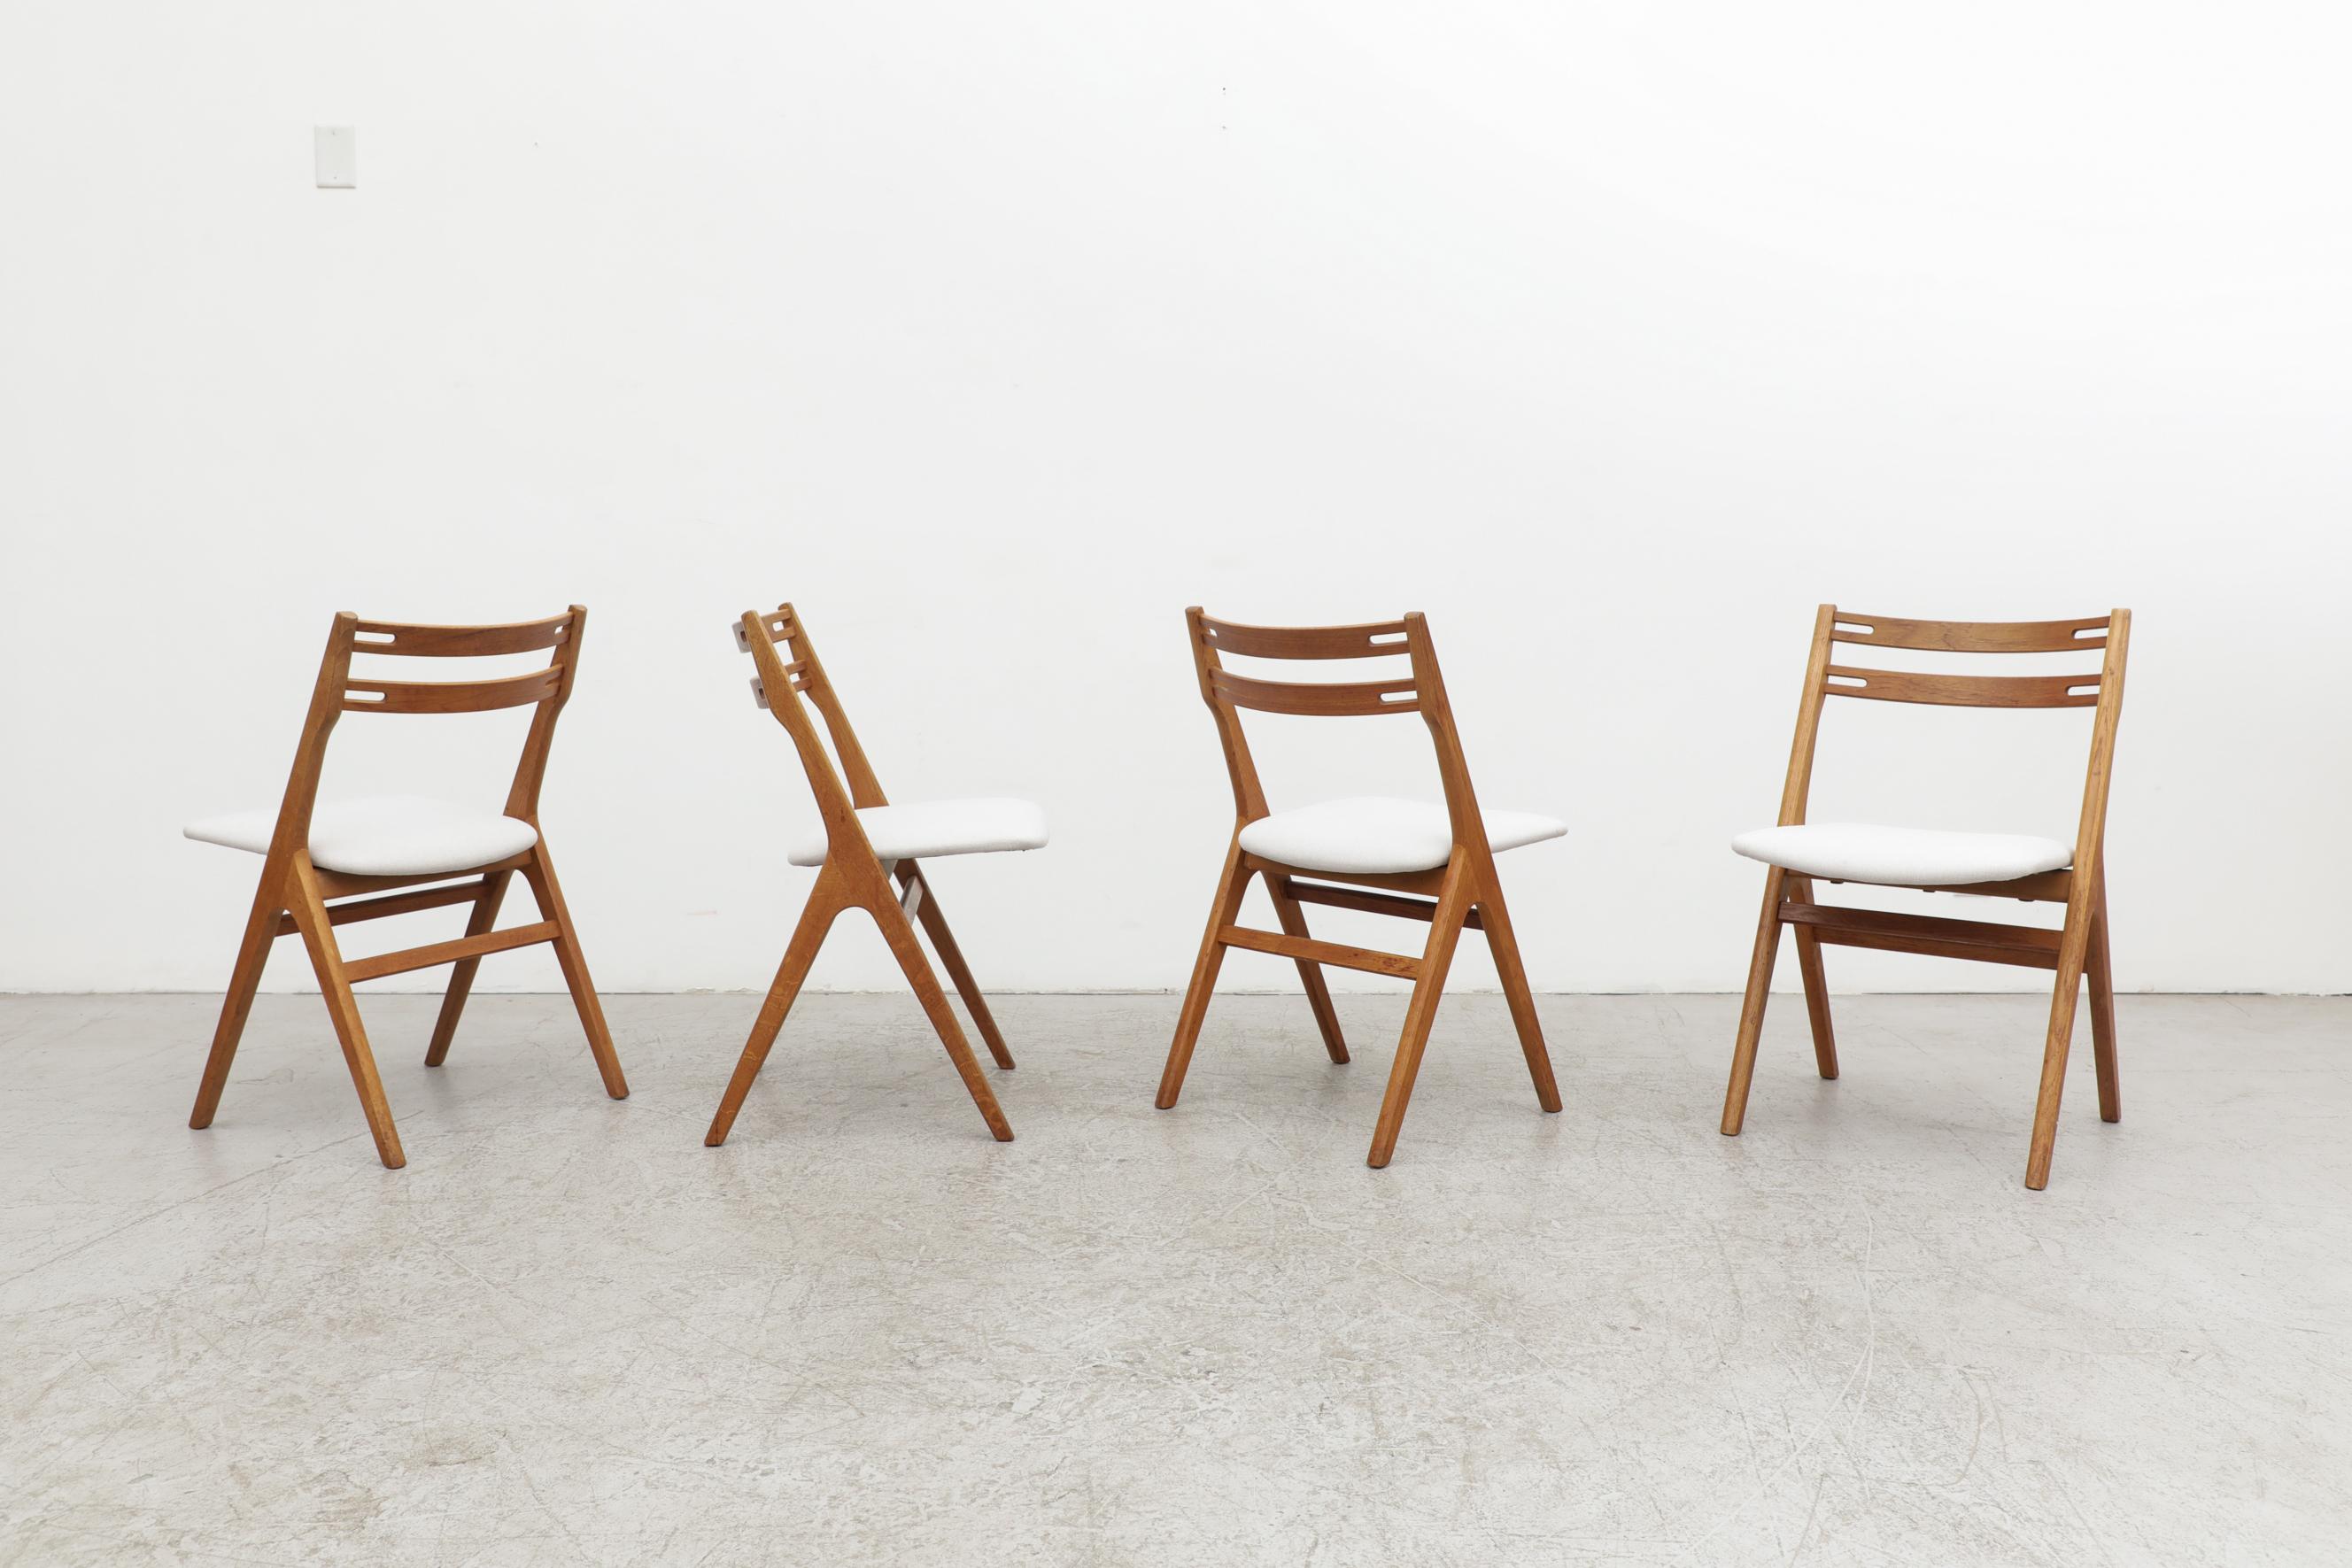 Set of 4 Hans Wegner style oak dining chairs with compass legs and a slightly bowed backrest by the Danish company Sibast, a Danish family company with a proud history of wooden furniture making dating back to 1908. These are in original condition